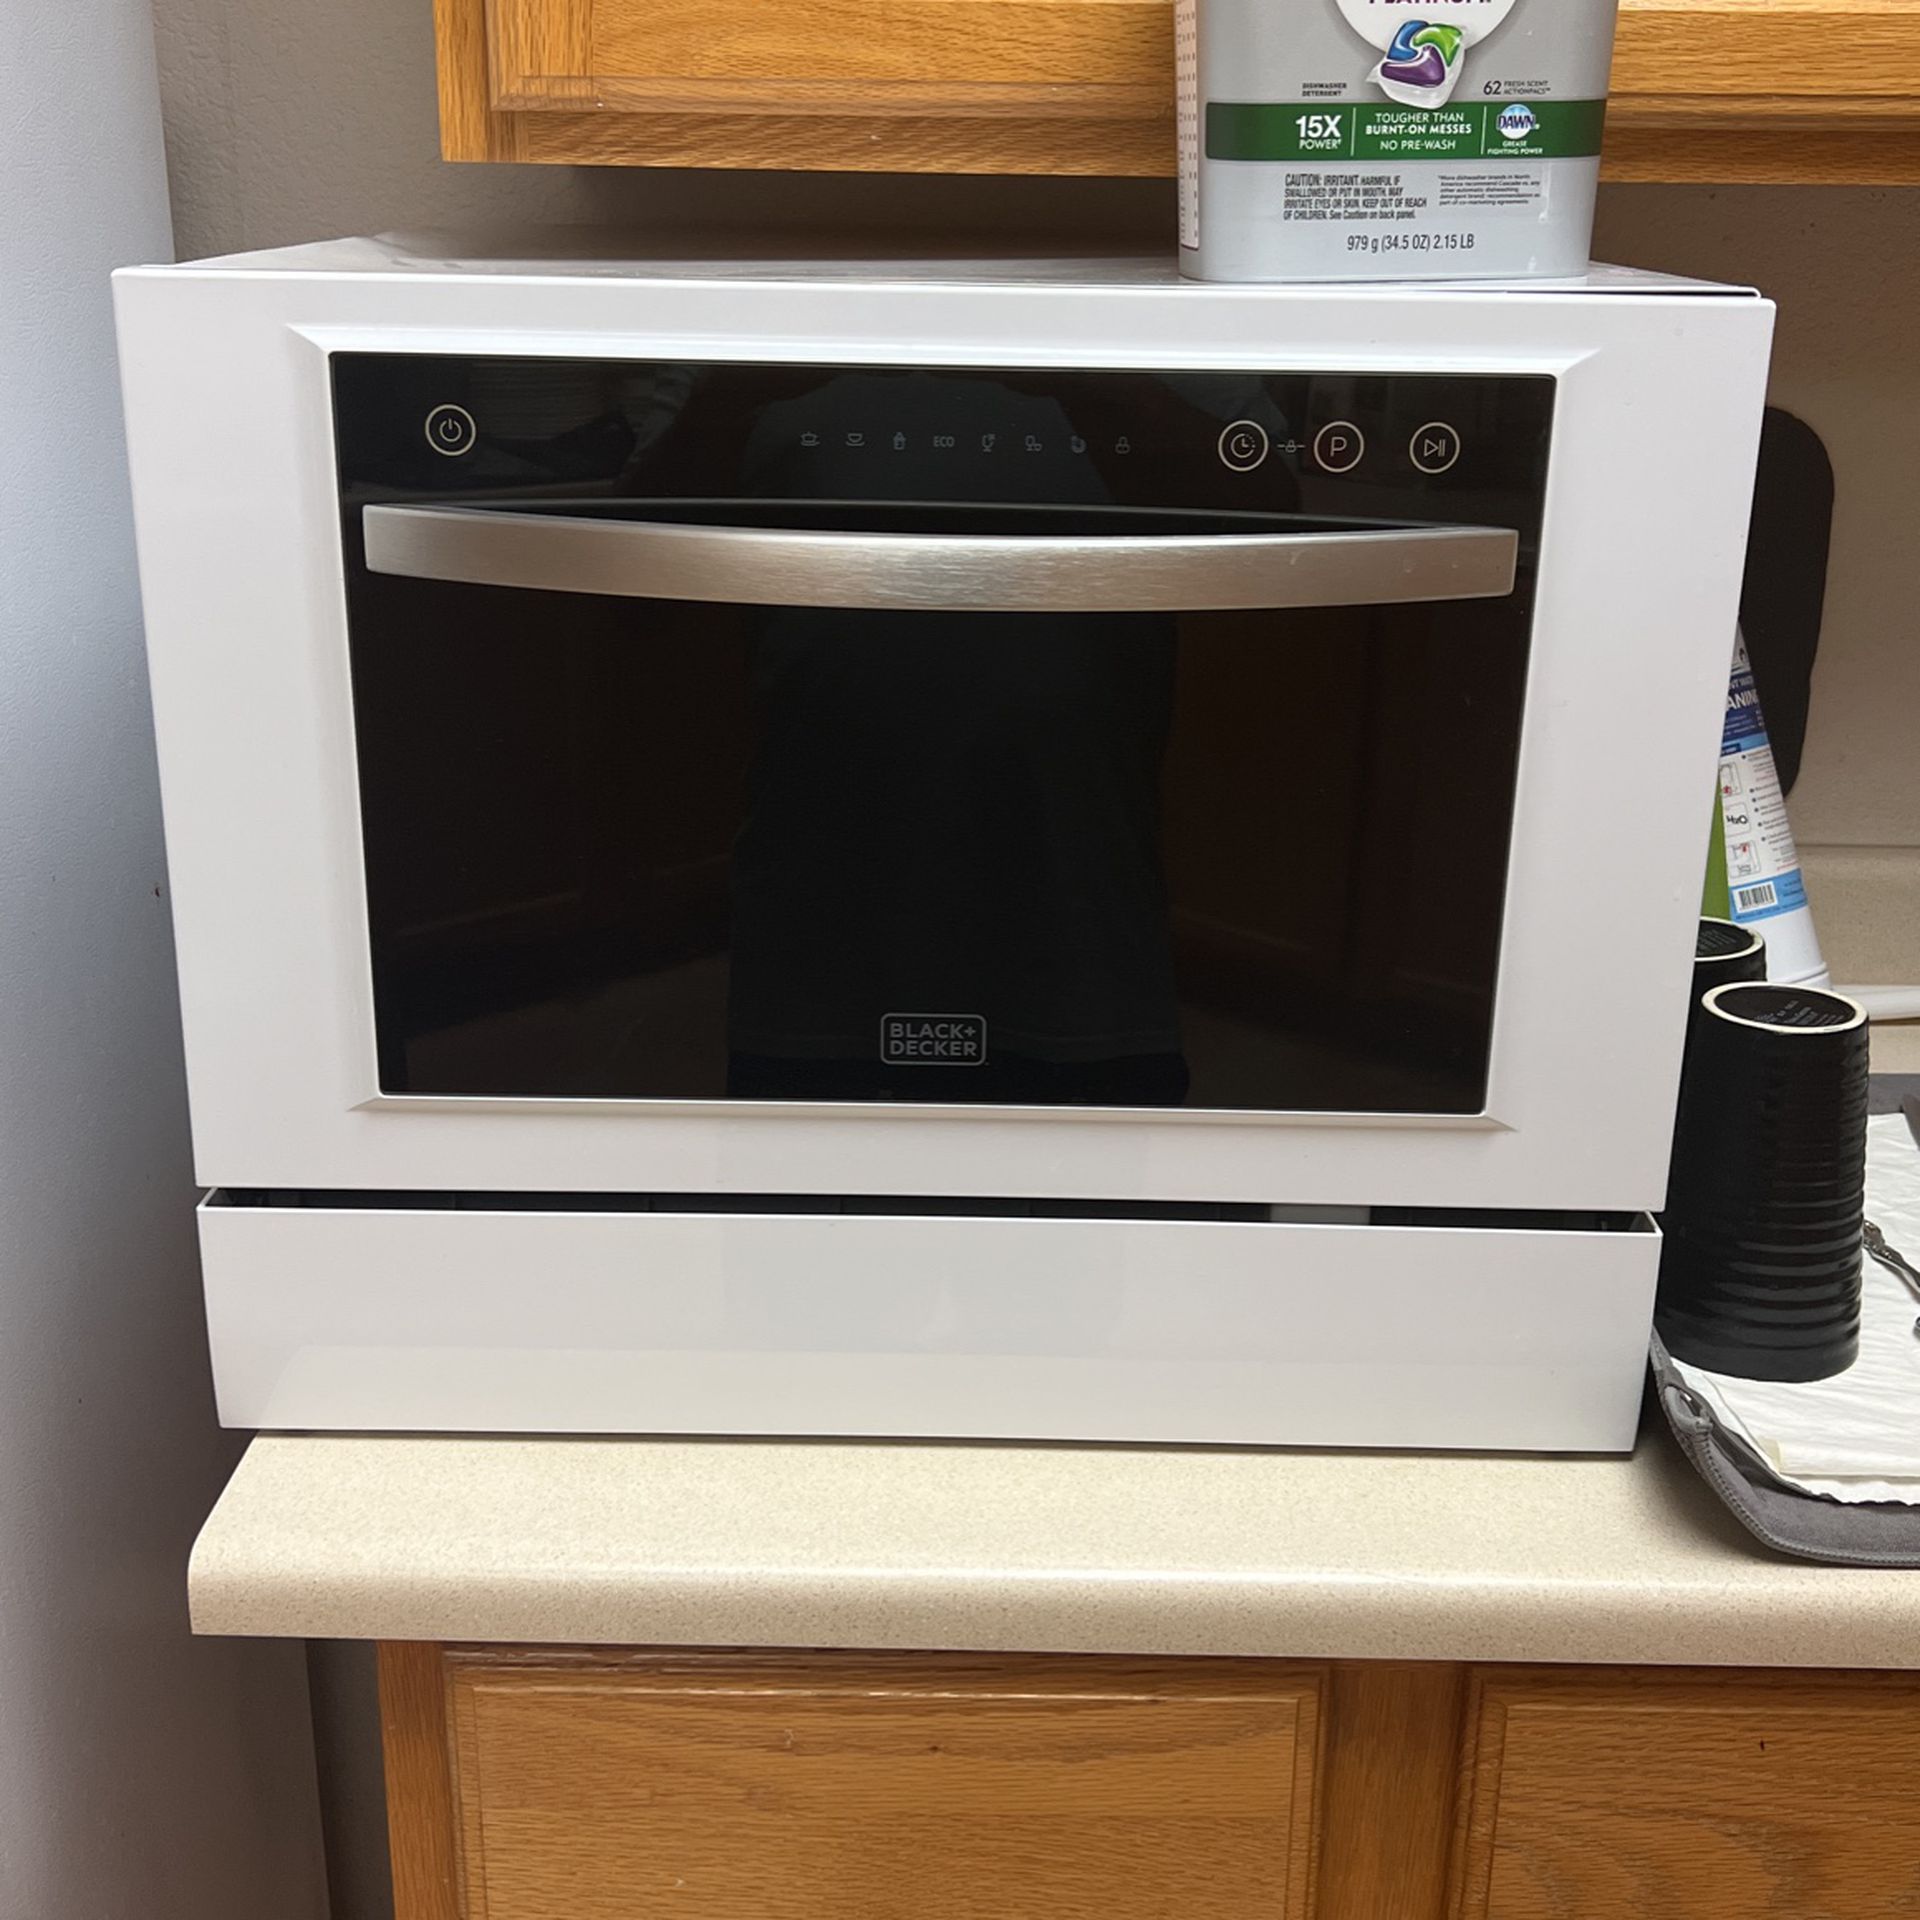 Black And Decker Portable Countertop Dishwasher for Sale in